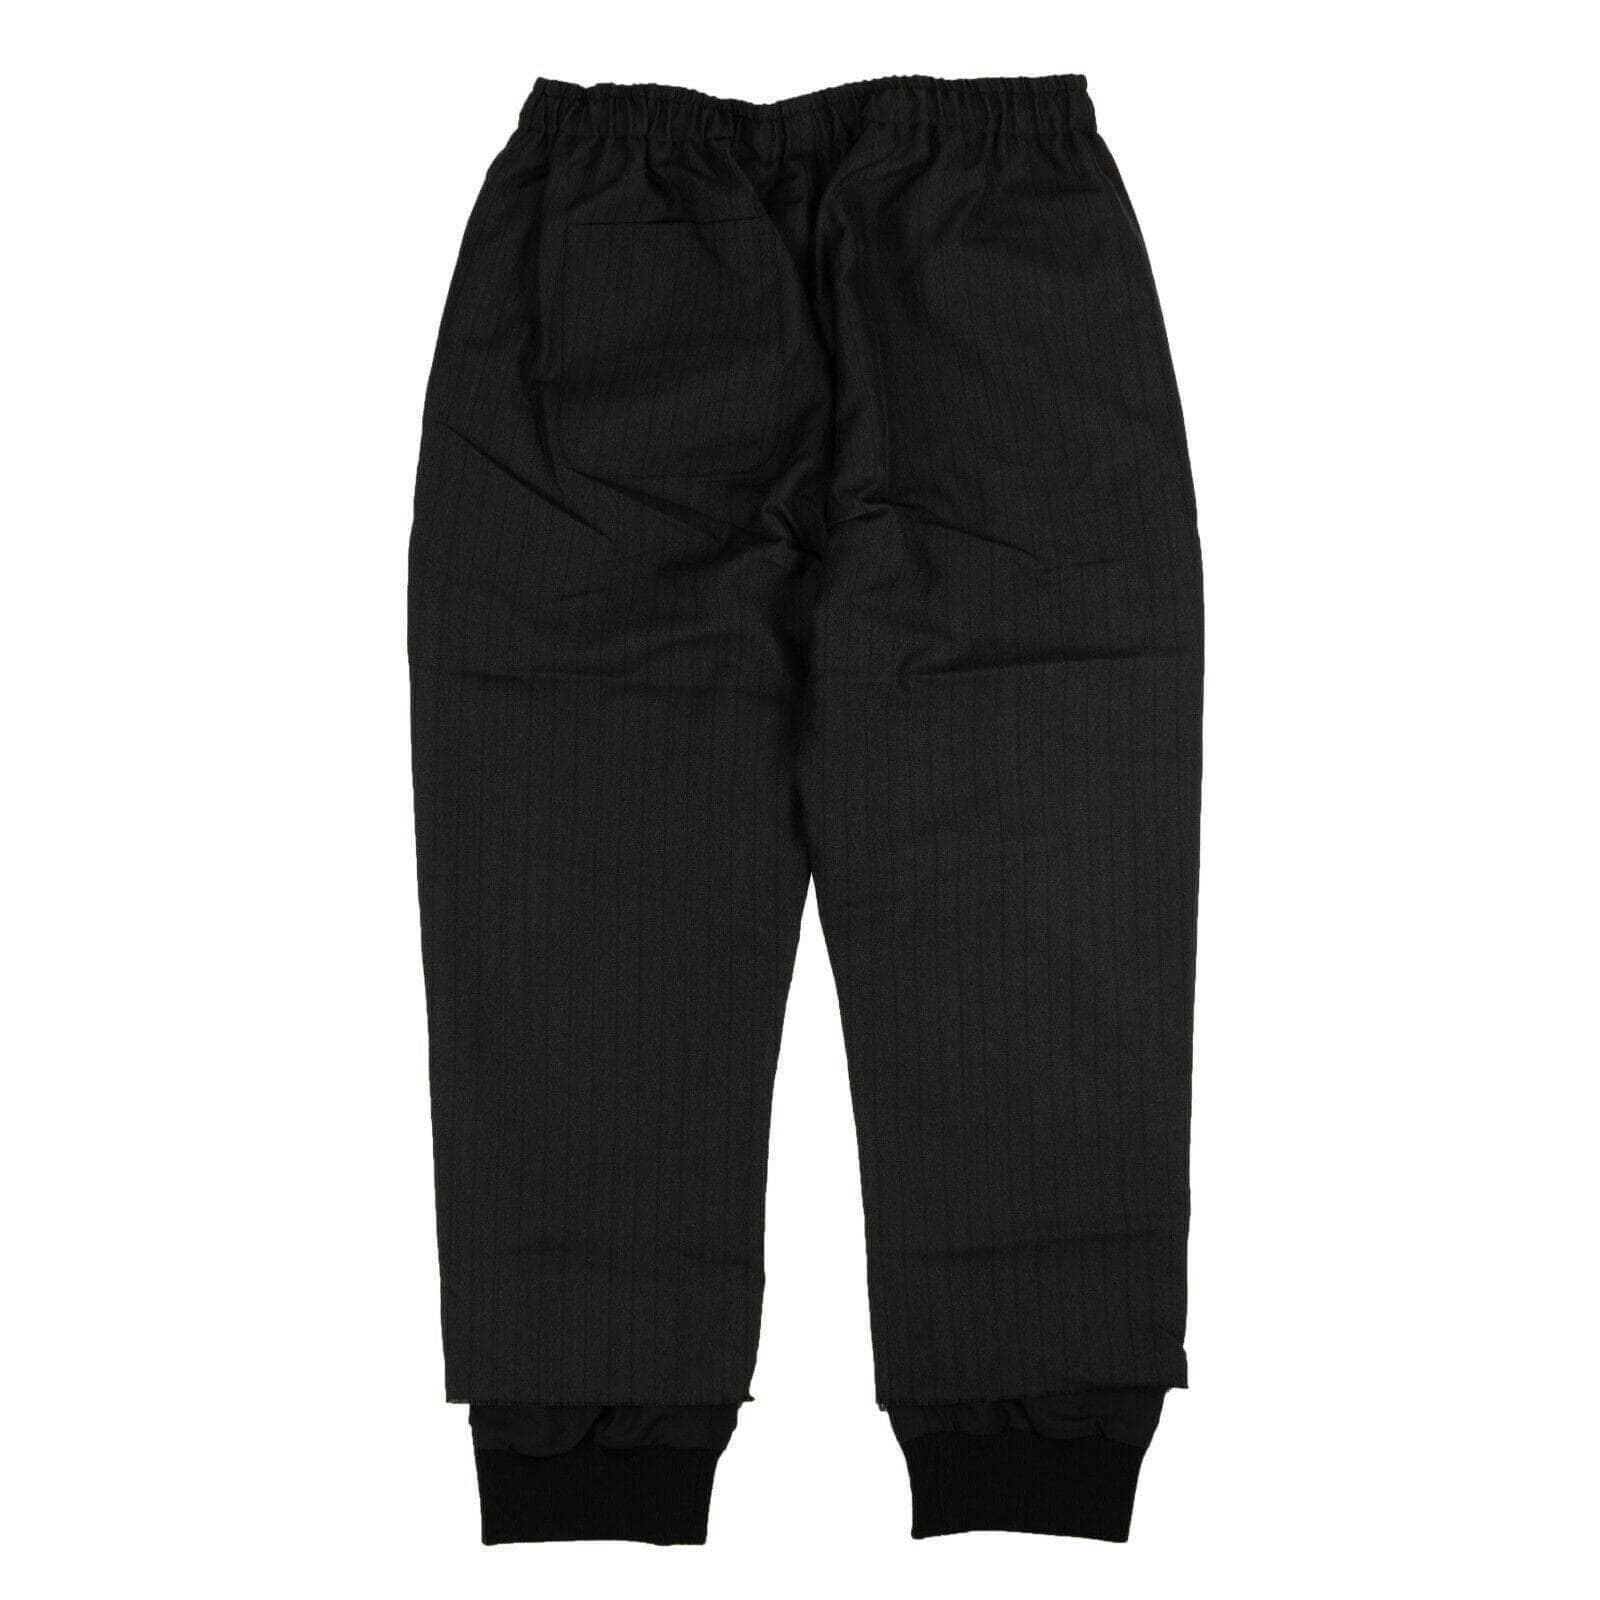 424 ON FAIRFAX 250-500, 424-on-fairfax, channelenable-all, chicmi, couponcollection, gender-mens, main-clothing, mens-joggers-sweatpants, mens-shoes, size-46, size-48, size-50 Black Pinstripe Drawstring Pants